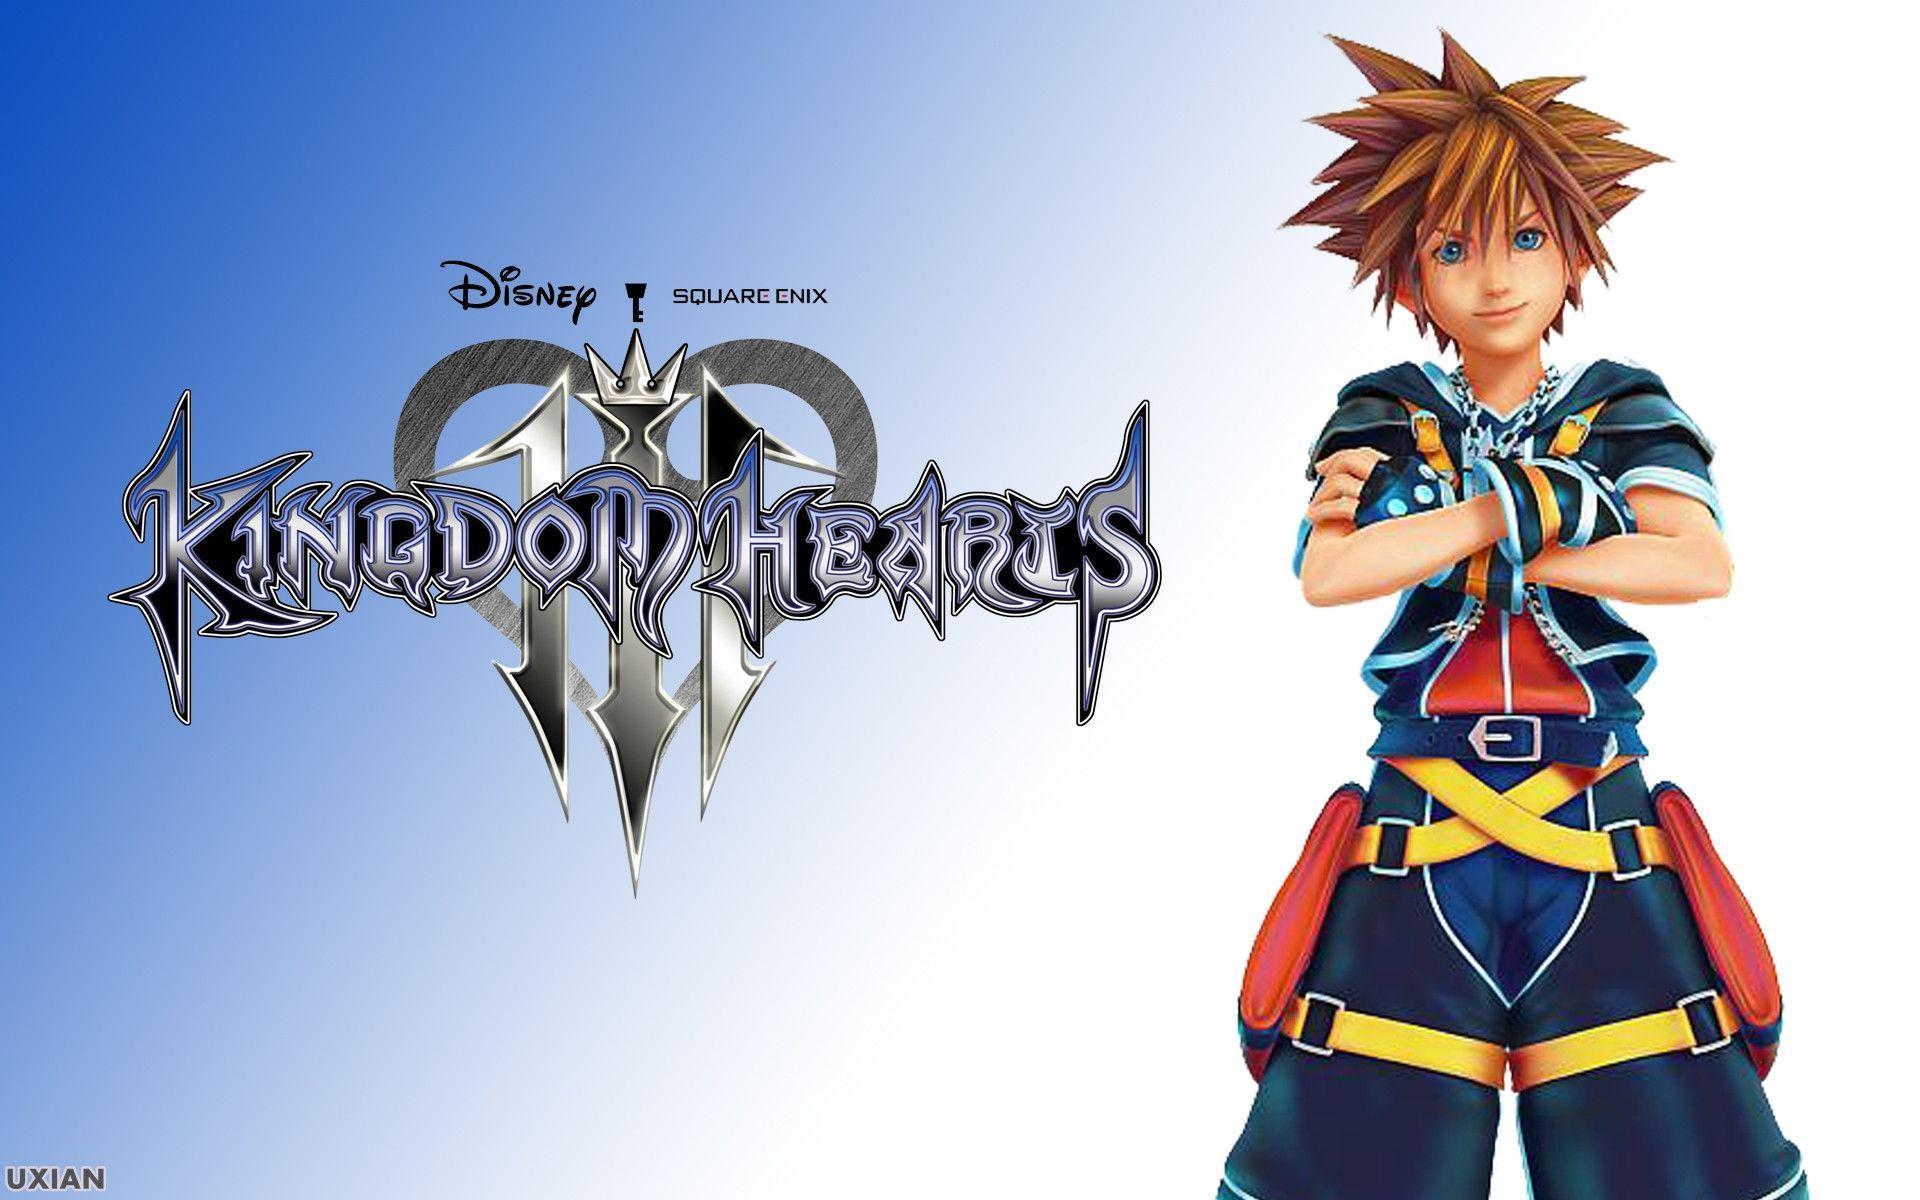 difference between kingdom hearts 3 and kingdomhearts 3 delux